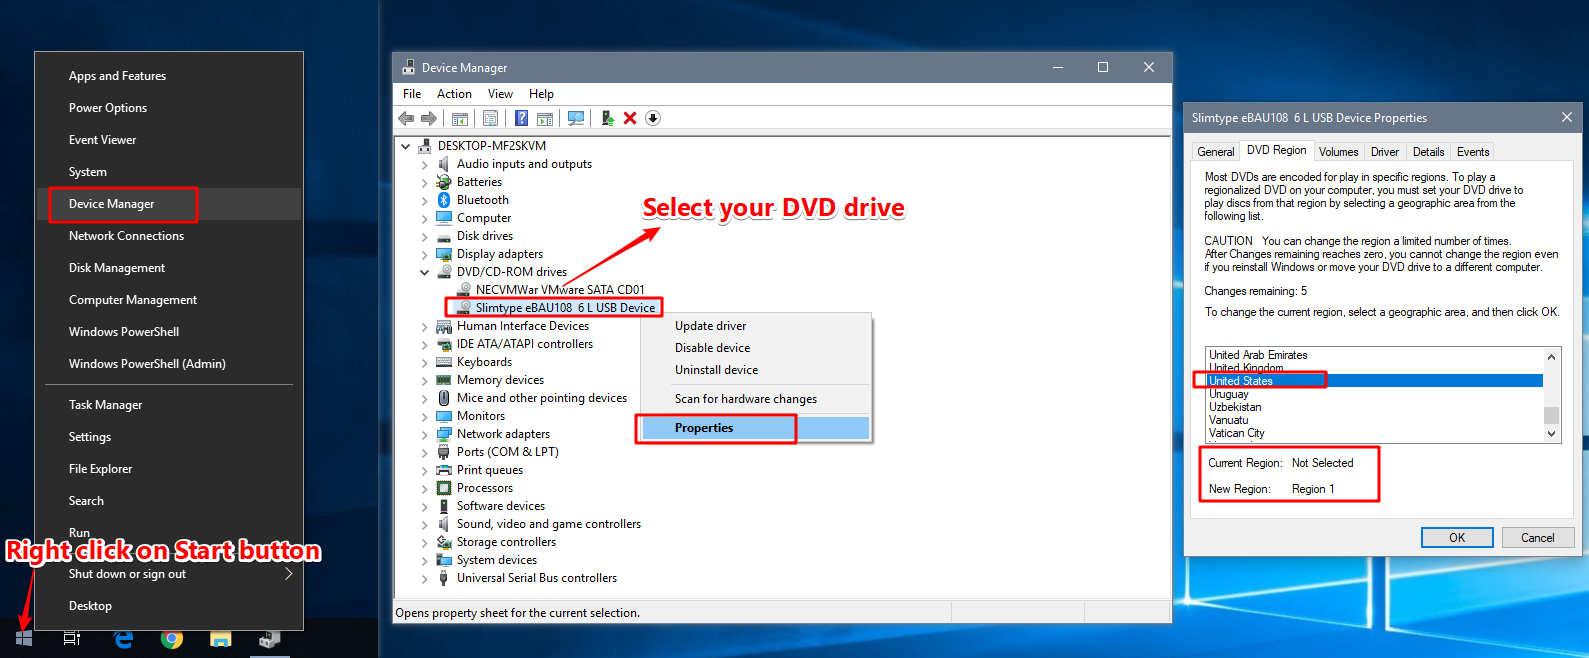 Cd Dvd Drive No Longer Works After W10 Update Microsoft Community